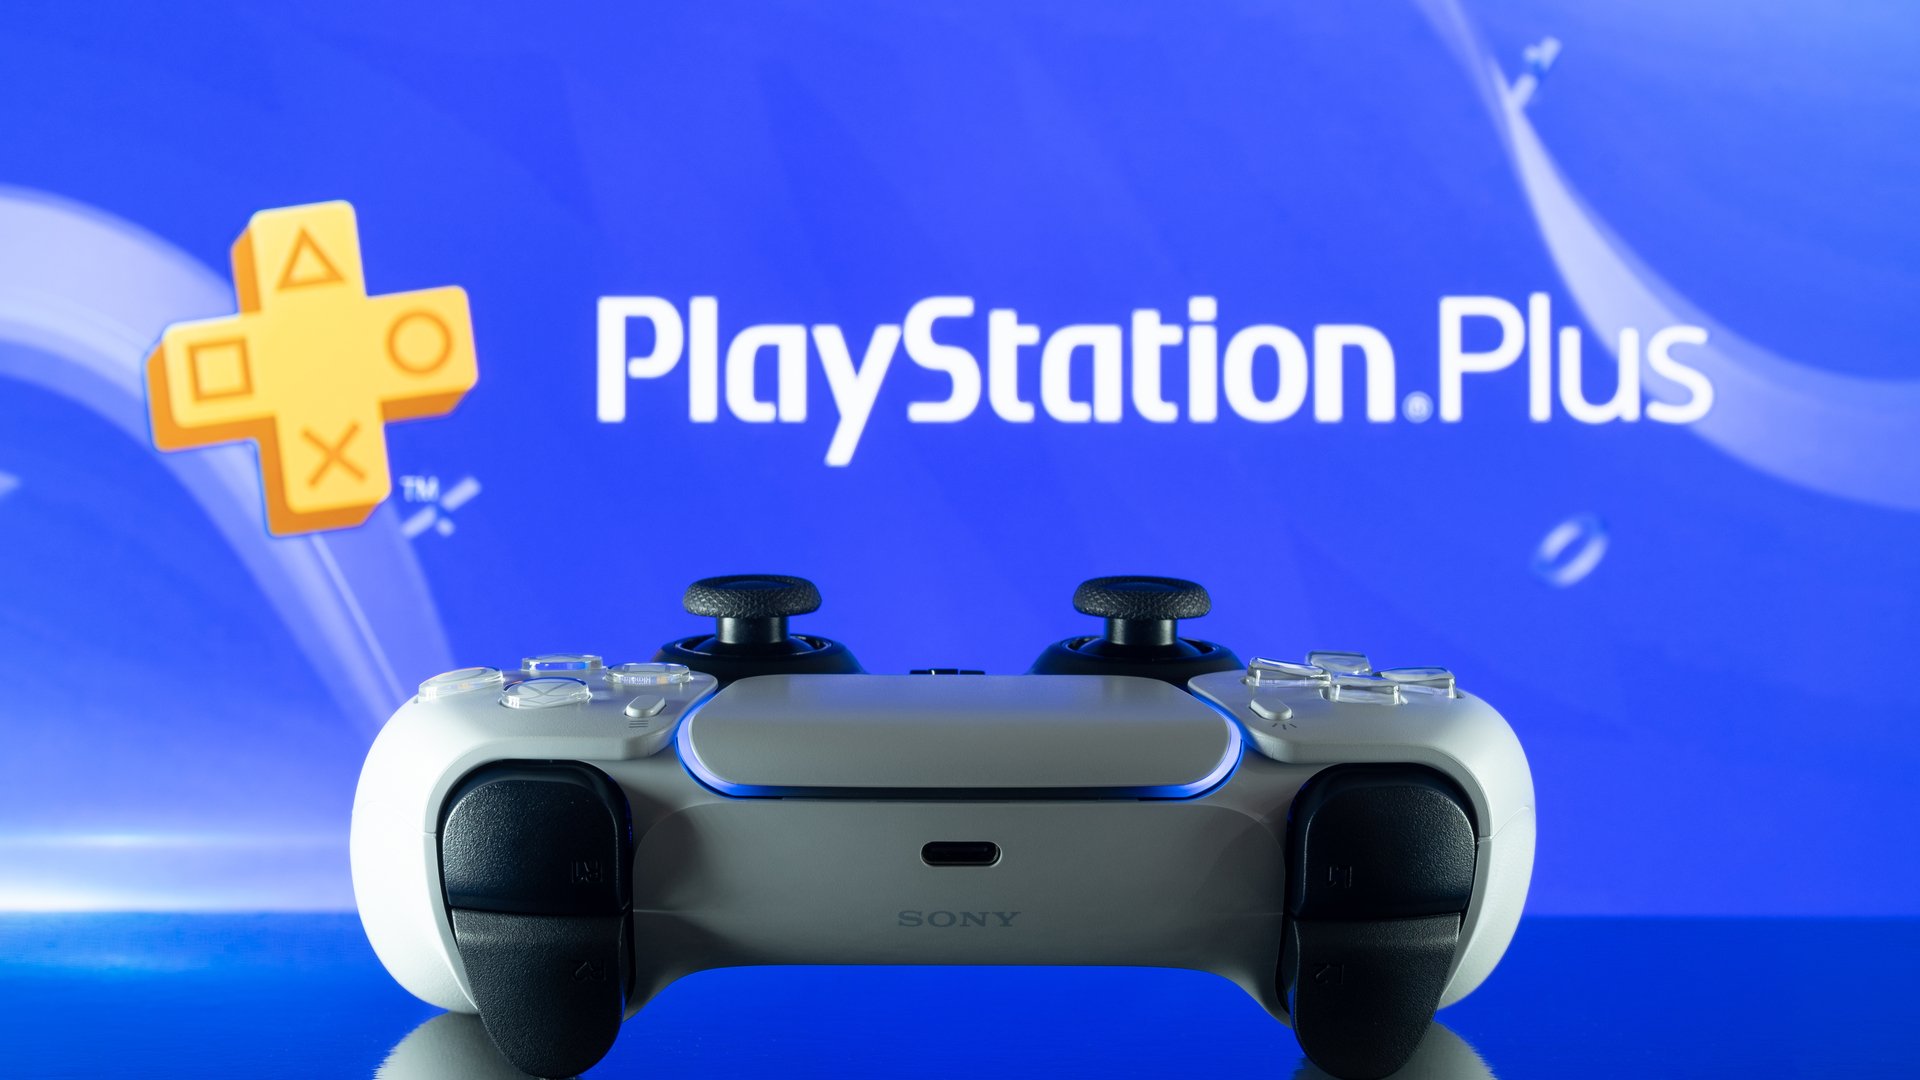 PS5 DualSense controller in front of the PlayStation Plus logo